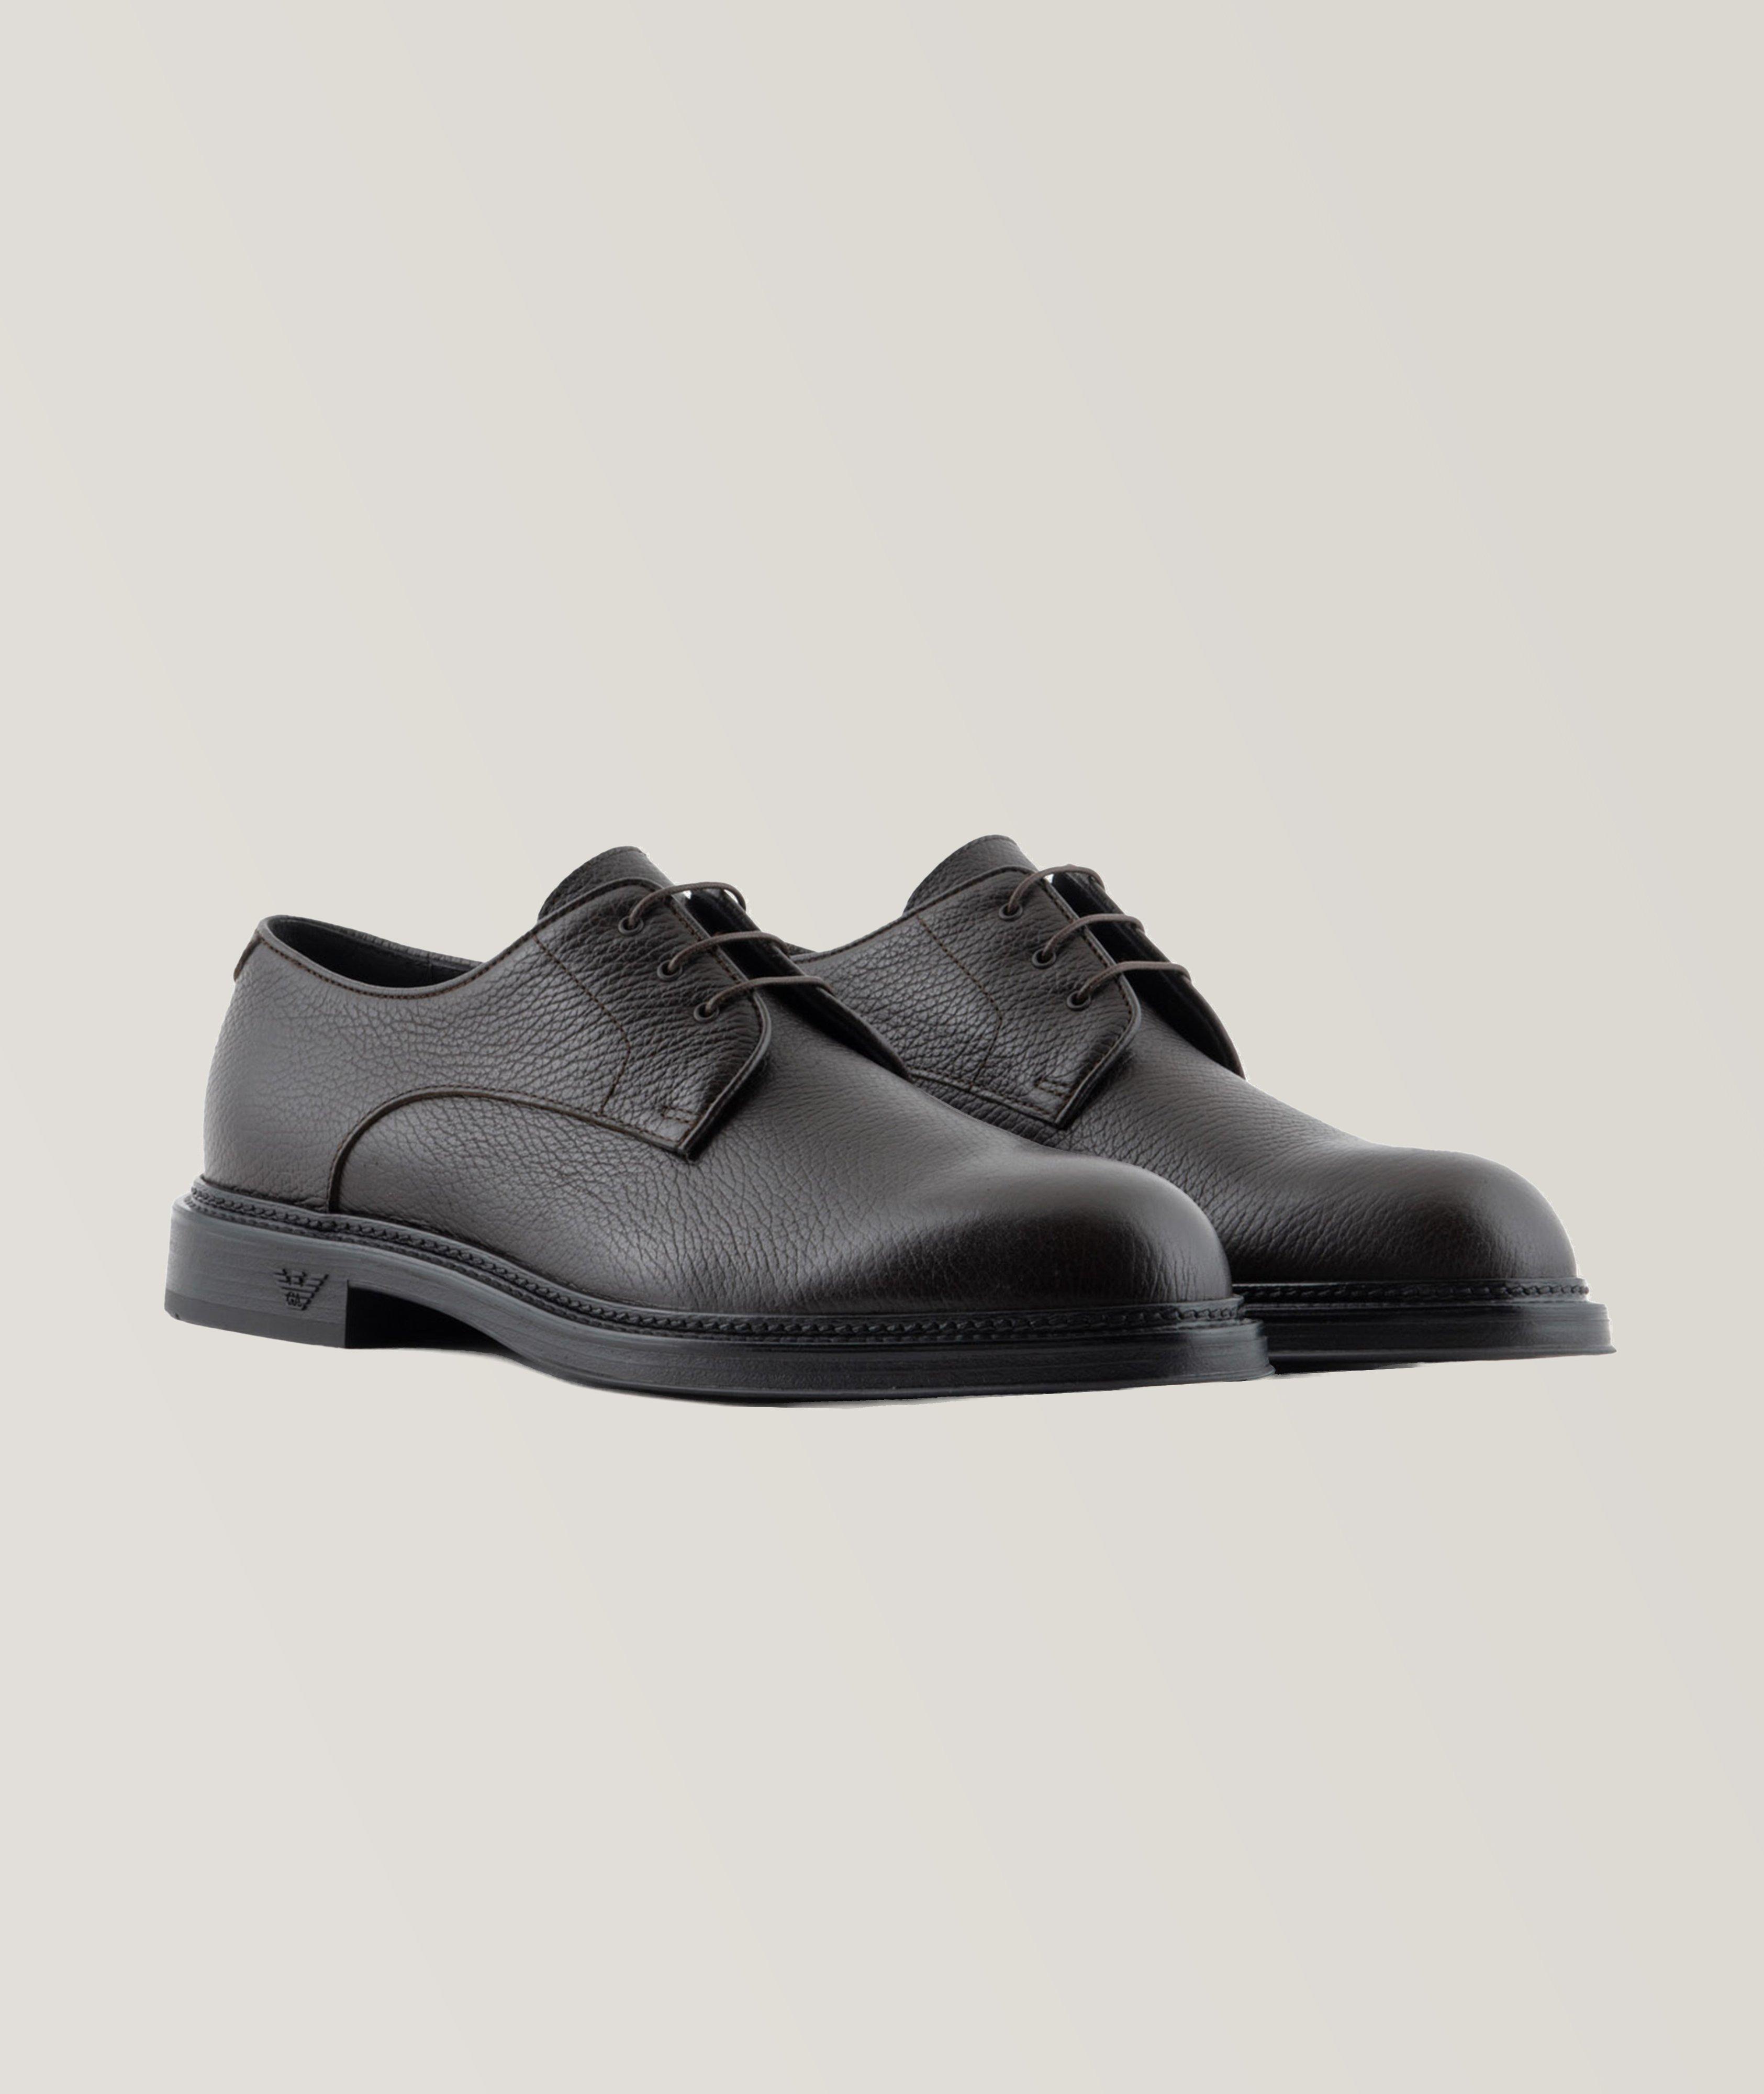 Grained Calfskin Leather Derbies image 1